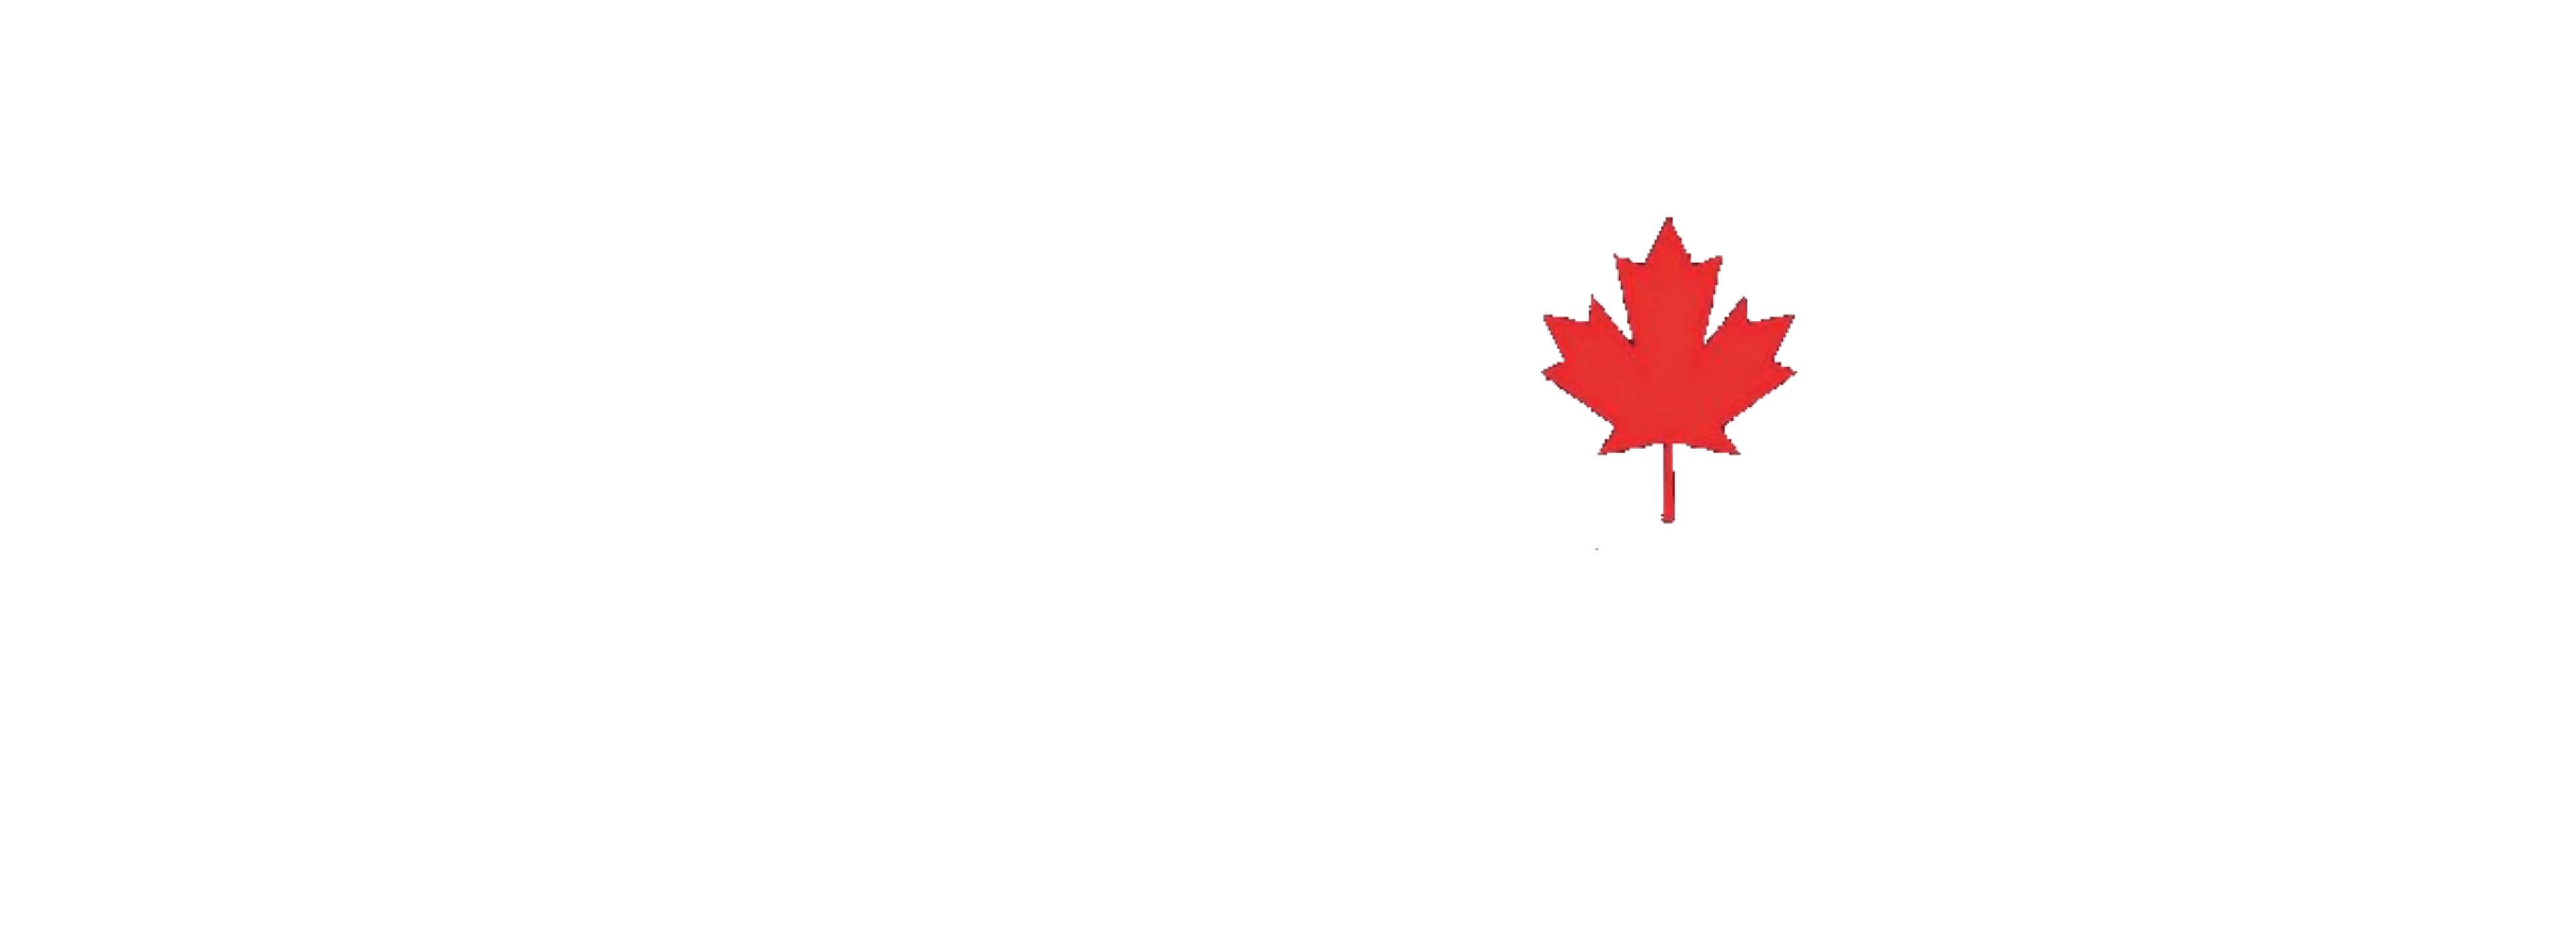 Logo of blackbiblio.com featuring white text and a silhouette of a profile with a red maple leaf on a green background. OCIDM,io Branding and Digital marketing Hamilton, Toronto, Oakville, Mississauga